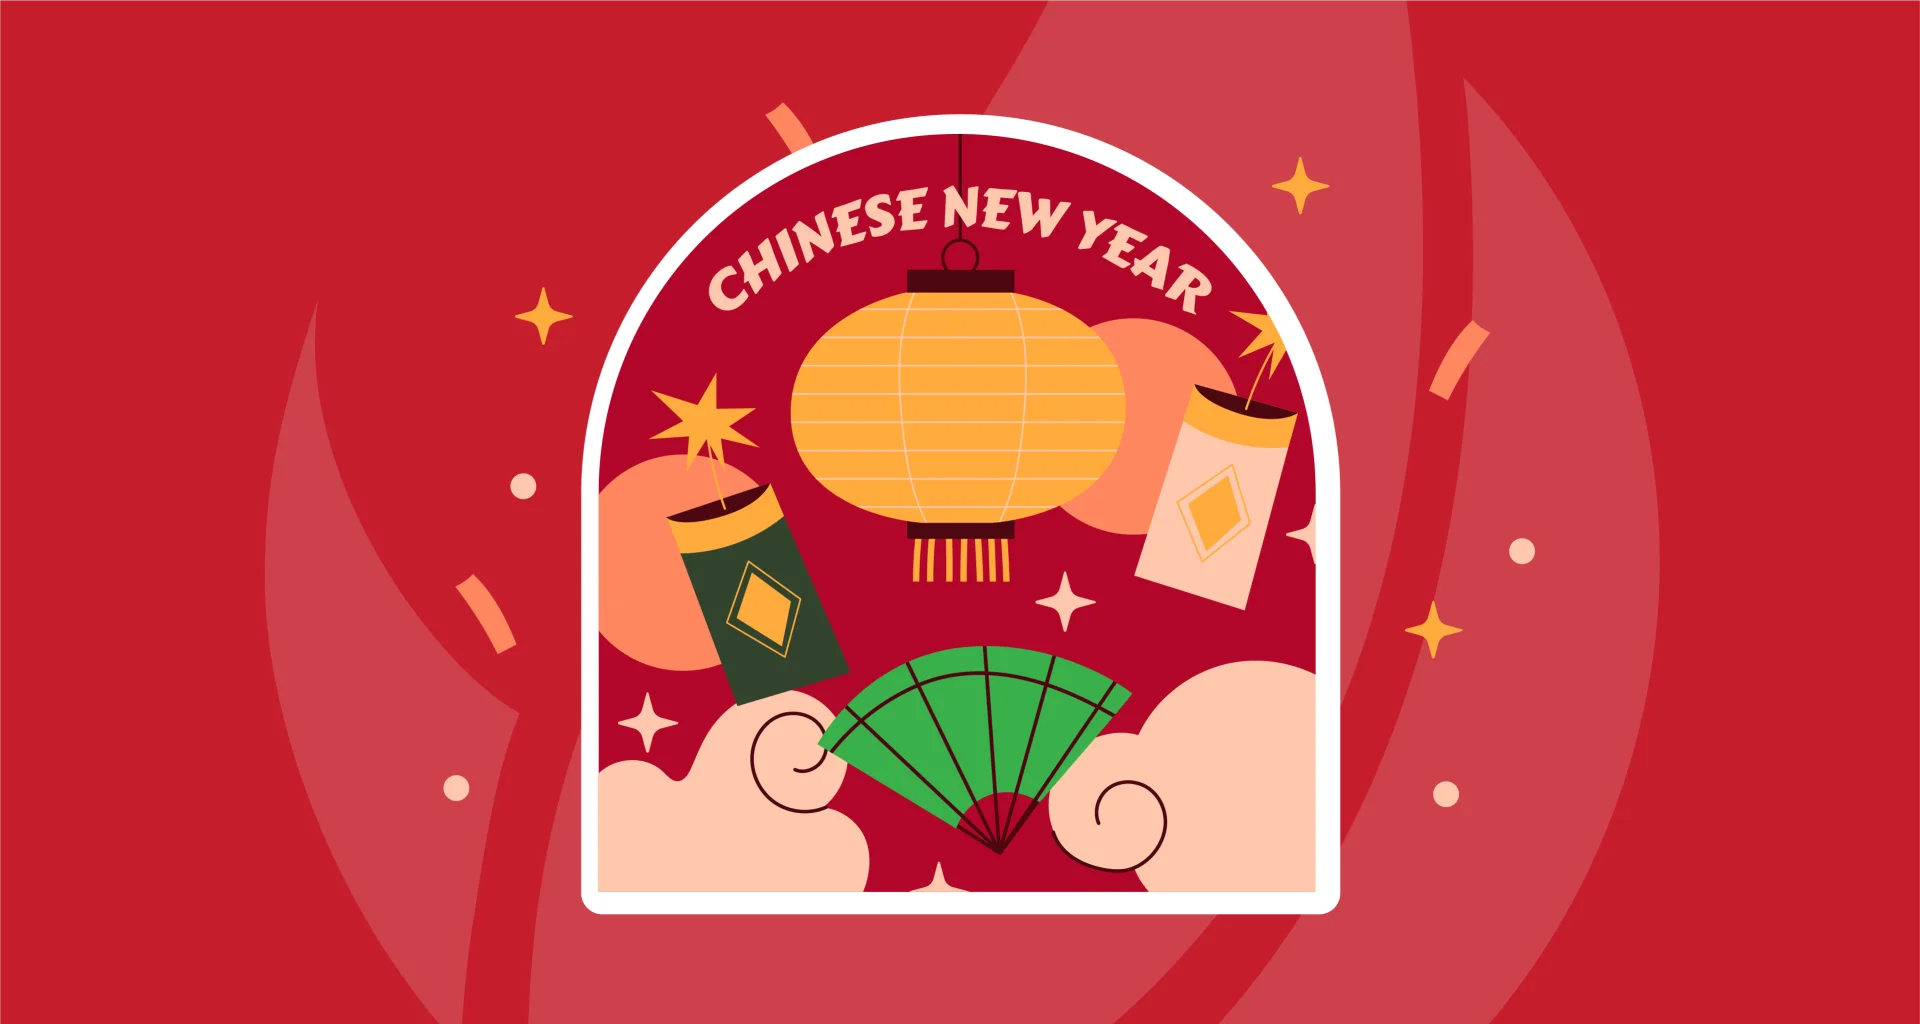 Experts In Chinese Marketing: How To Prepare Your Business For Chinese New Year